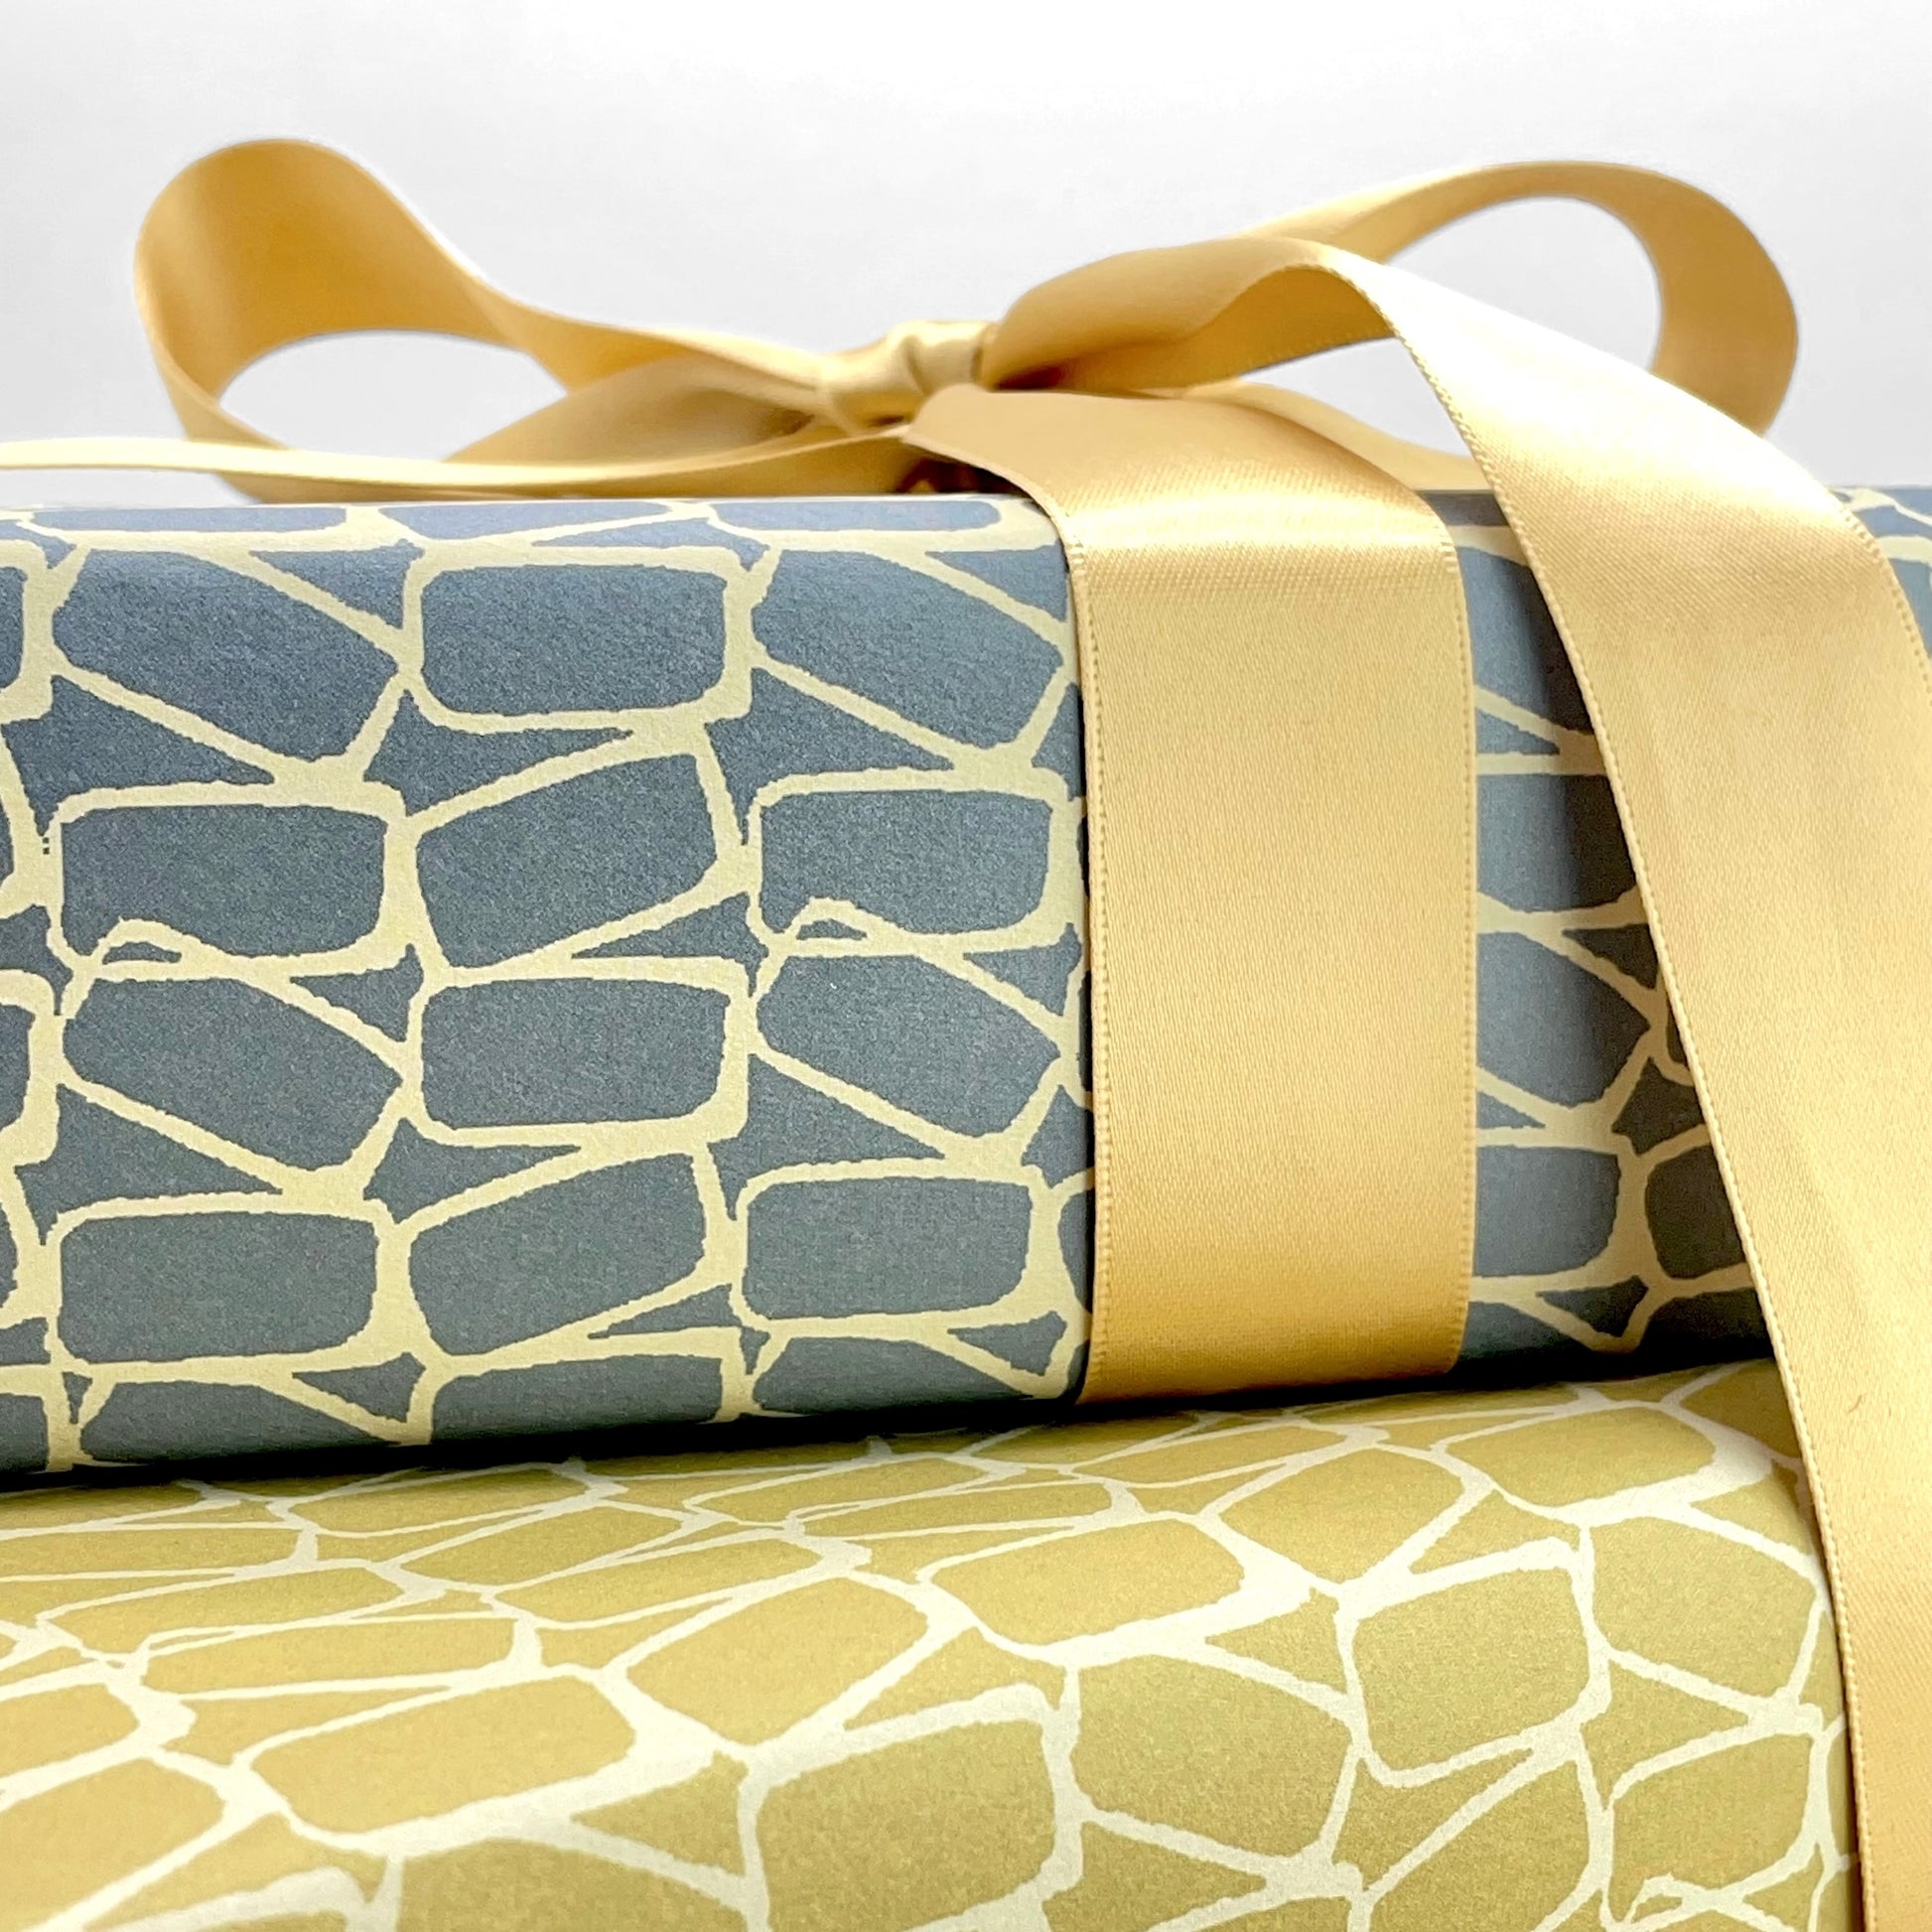 wrapping paper by Anne Davison Studio. Creamy domino outlined shapes on a dusky blue background. Close up 